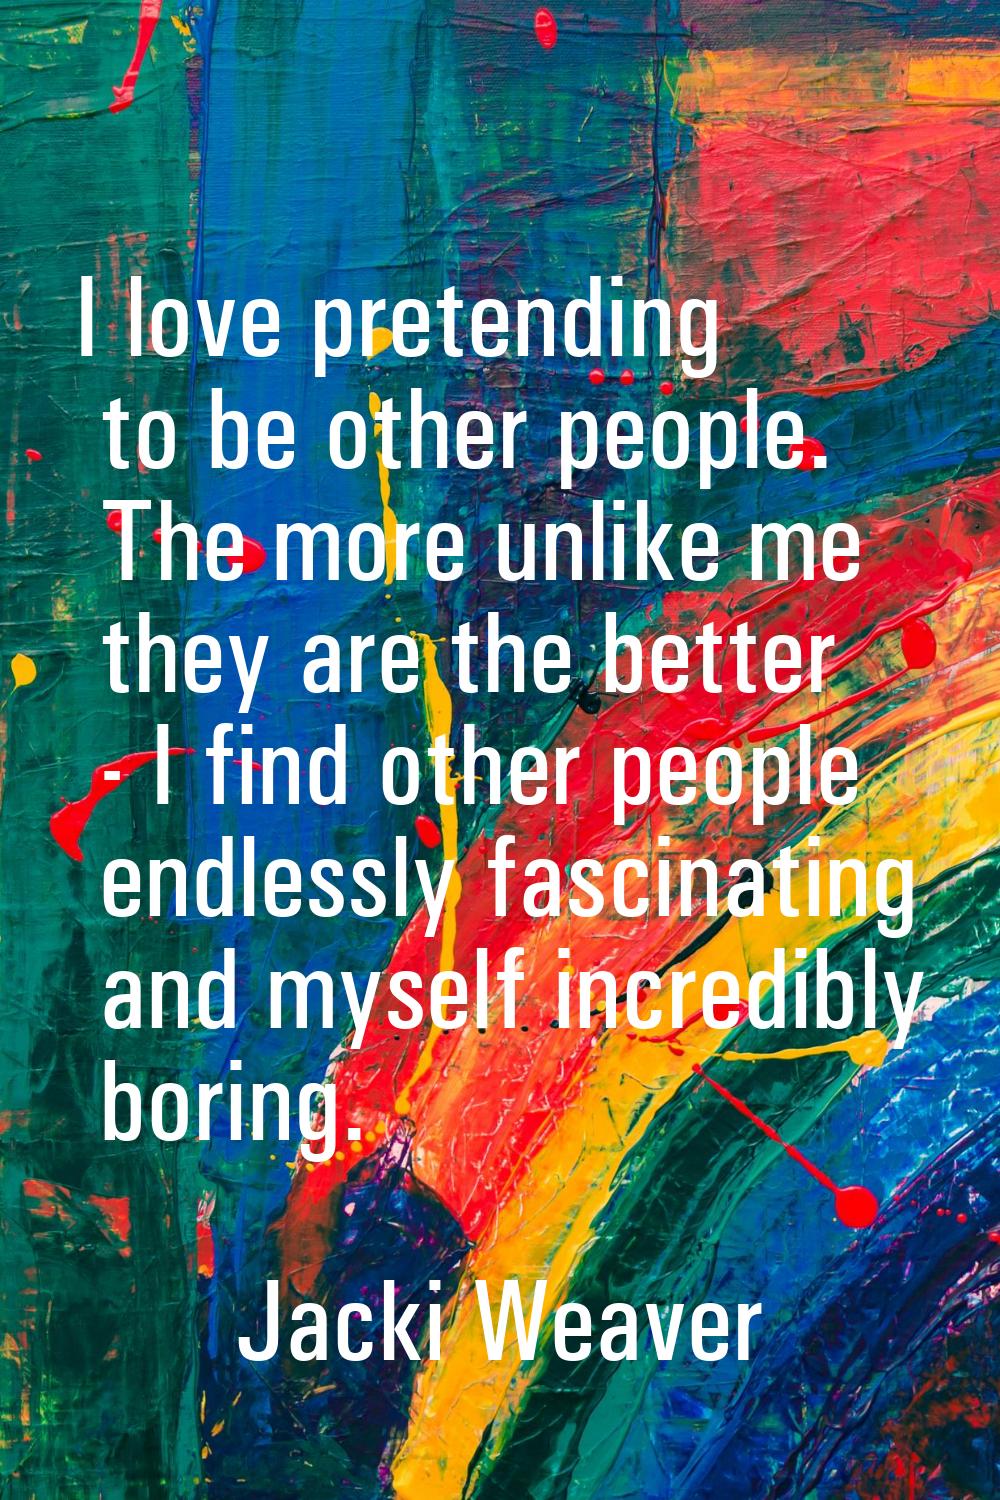 I love pretending to be other people. The more unlike me they are the better - I find other people 